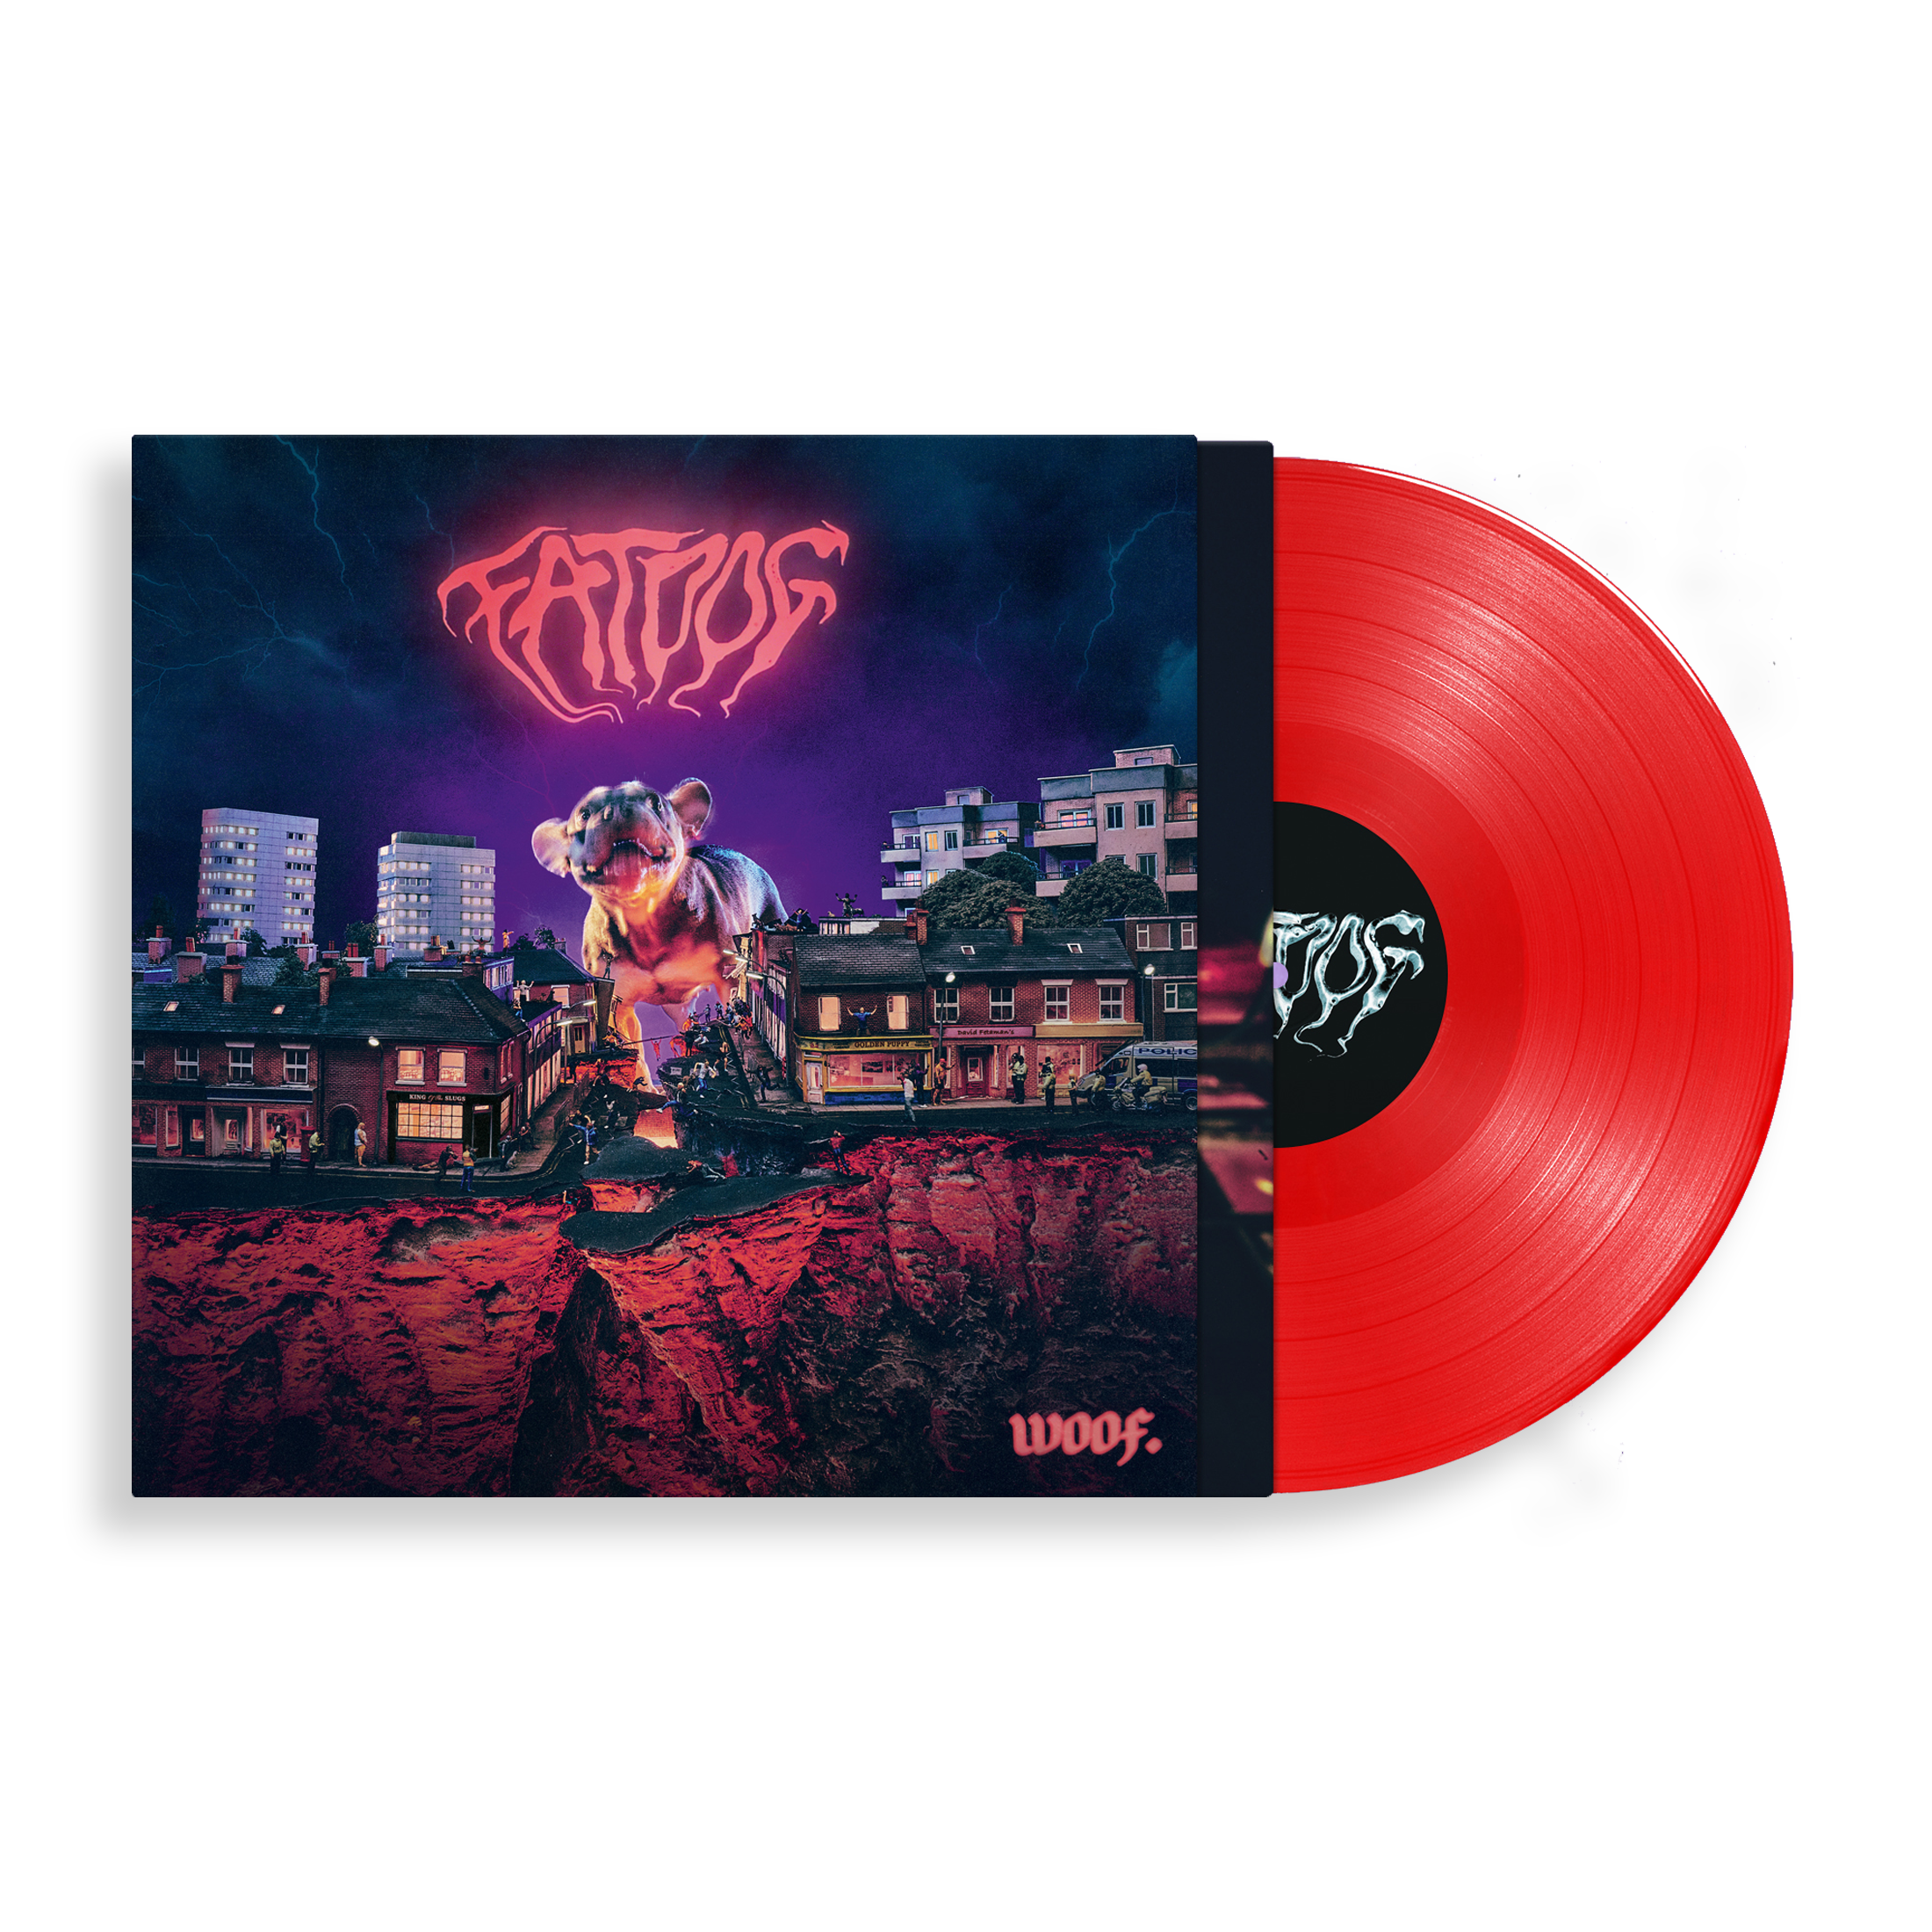 WOOF. Limited Red Vinyl LP